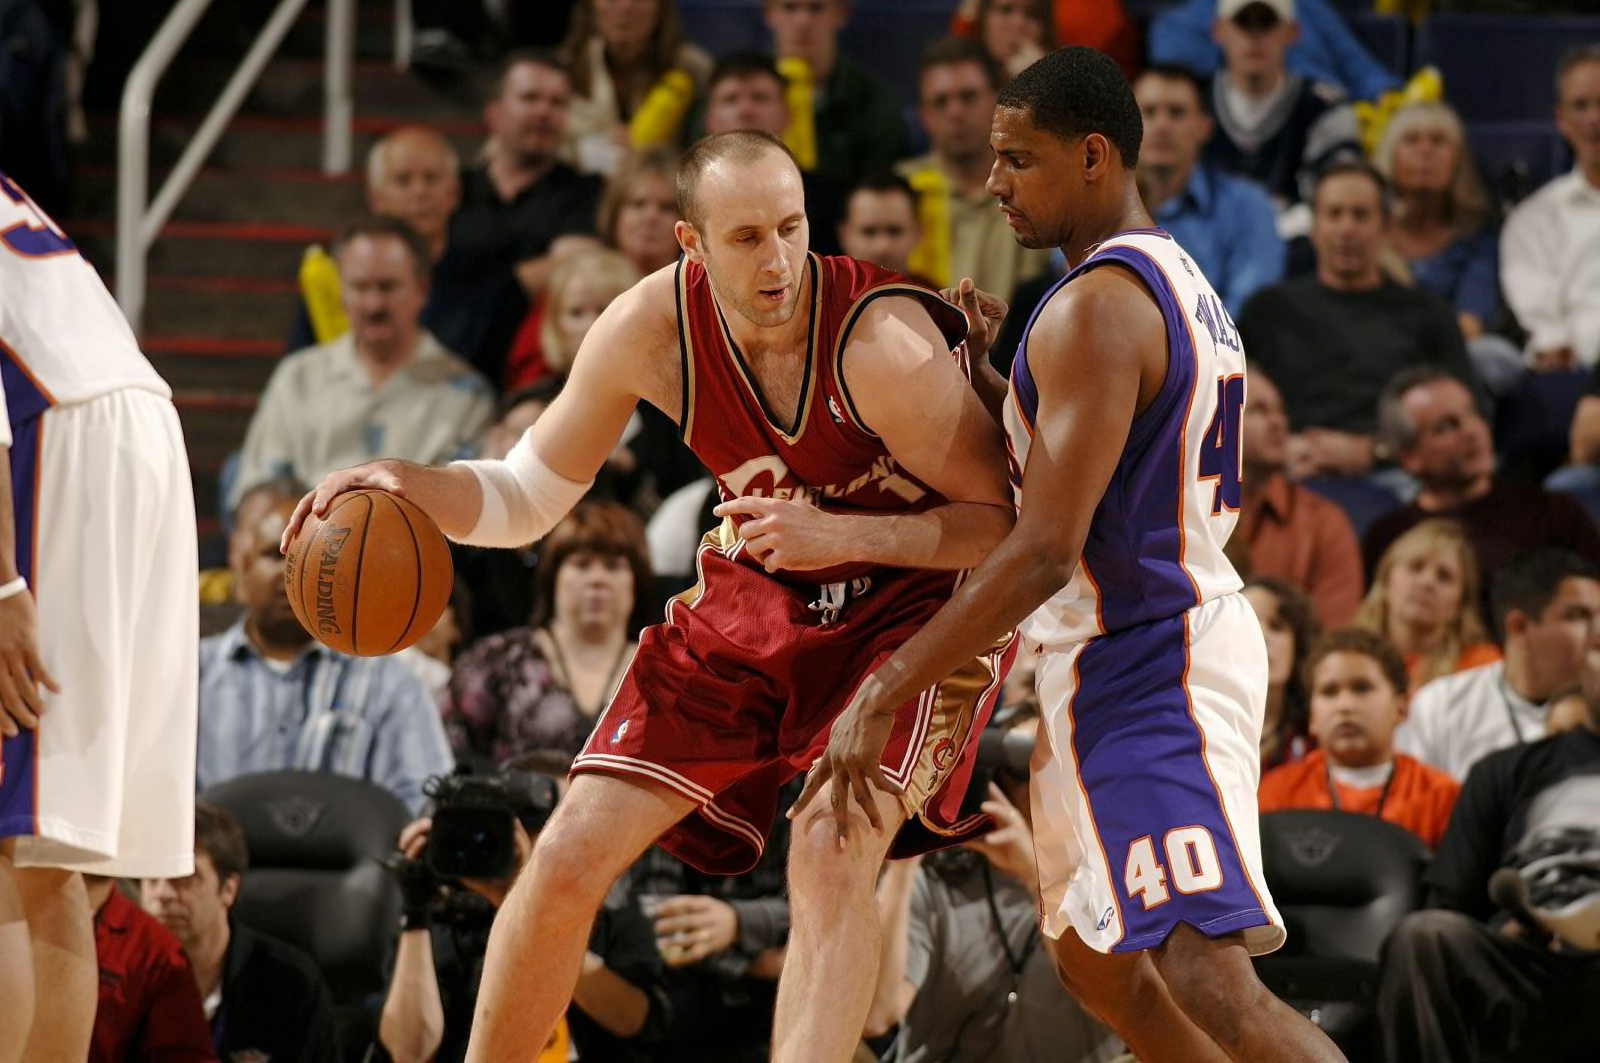 The Cavaliers will retire the jersey of Zydrunas Ilgauskas in March